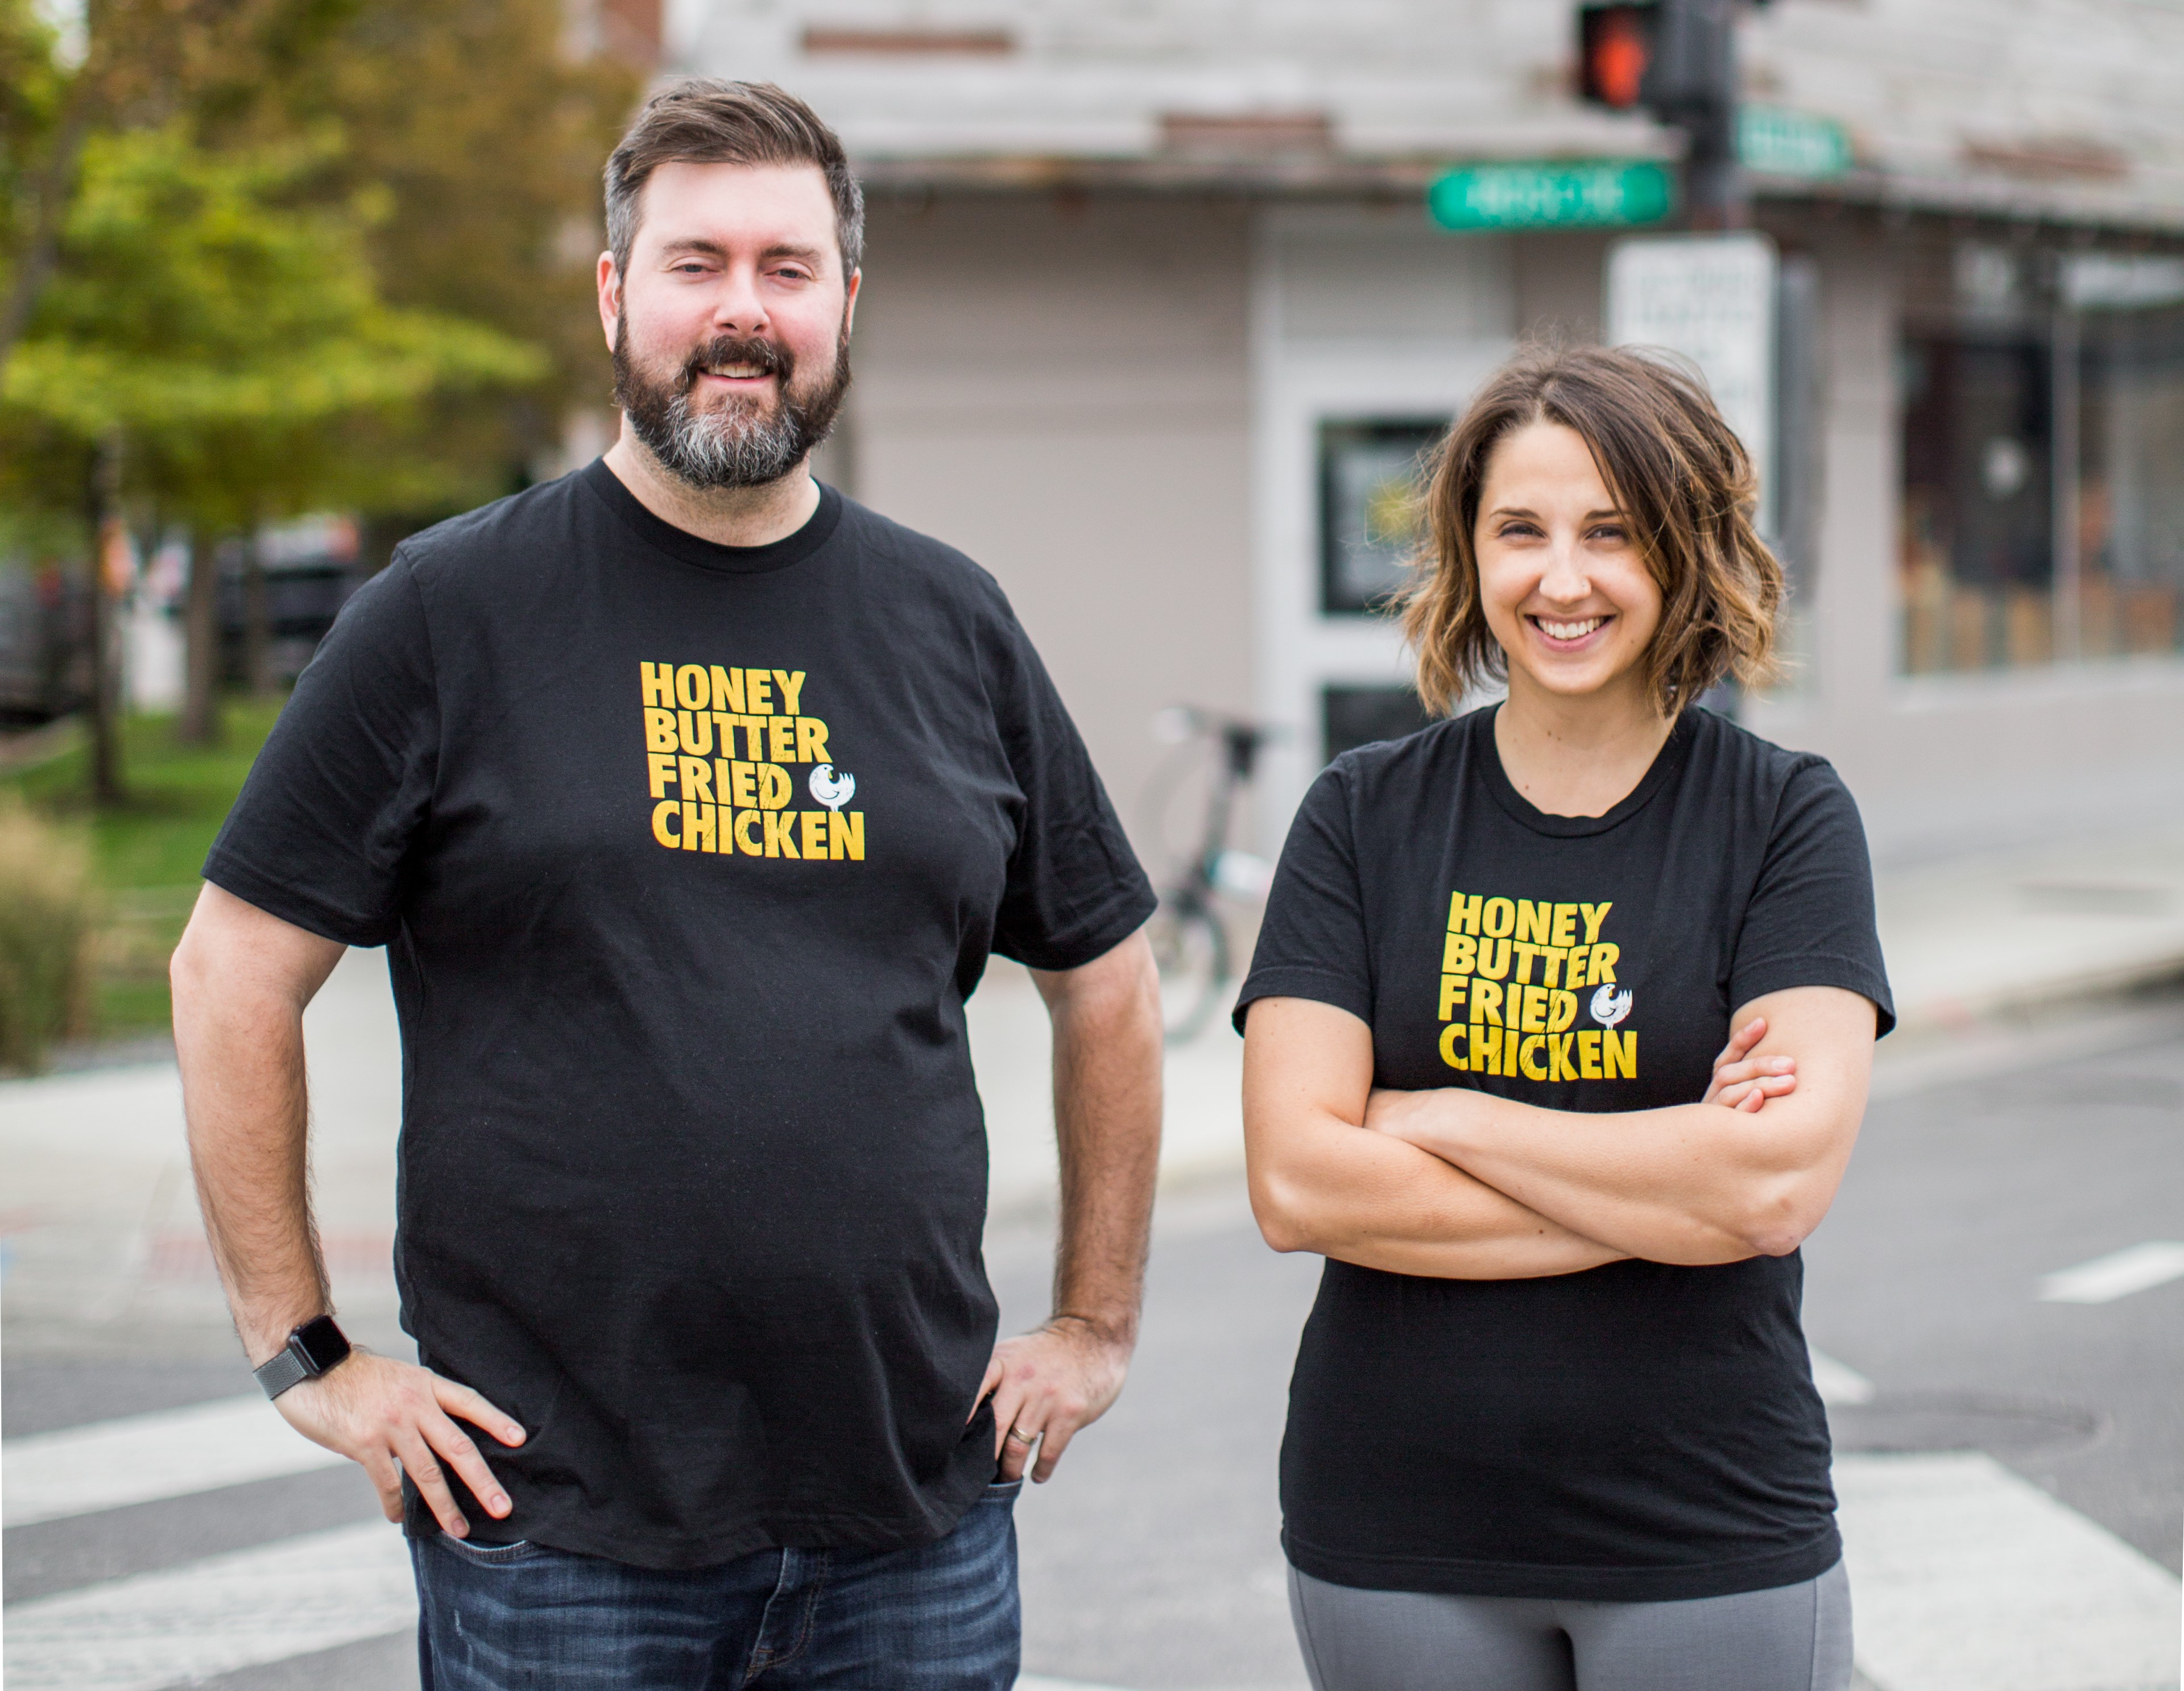 A man and woman wearing the same black T-shirts with the Honey Butter Fried Chicken logo standing outside and smiling.